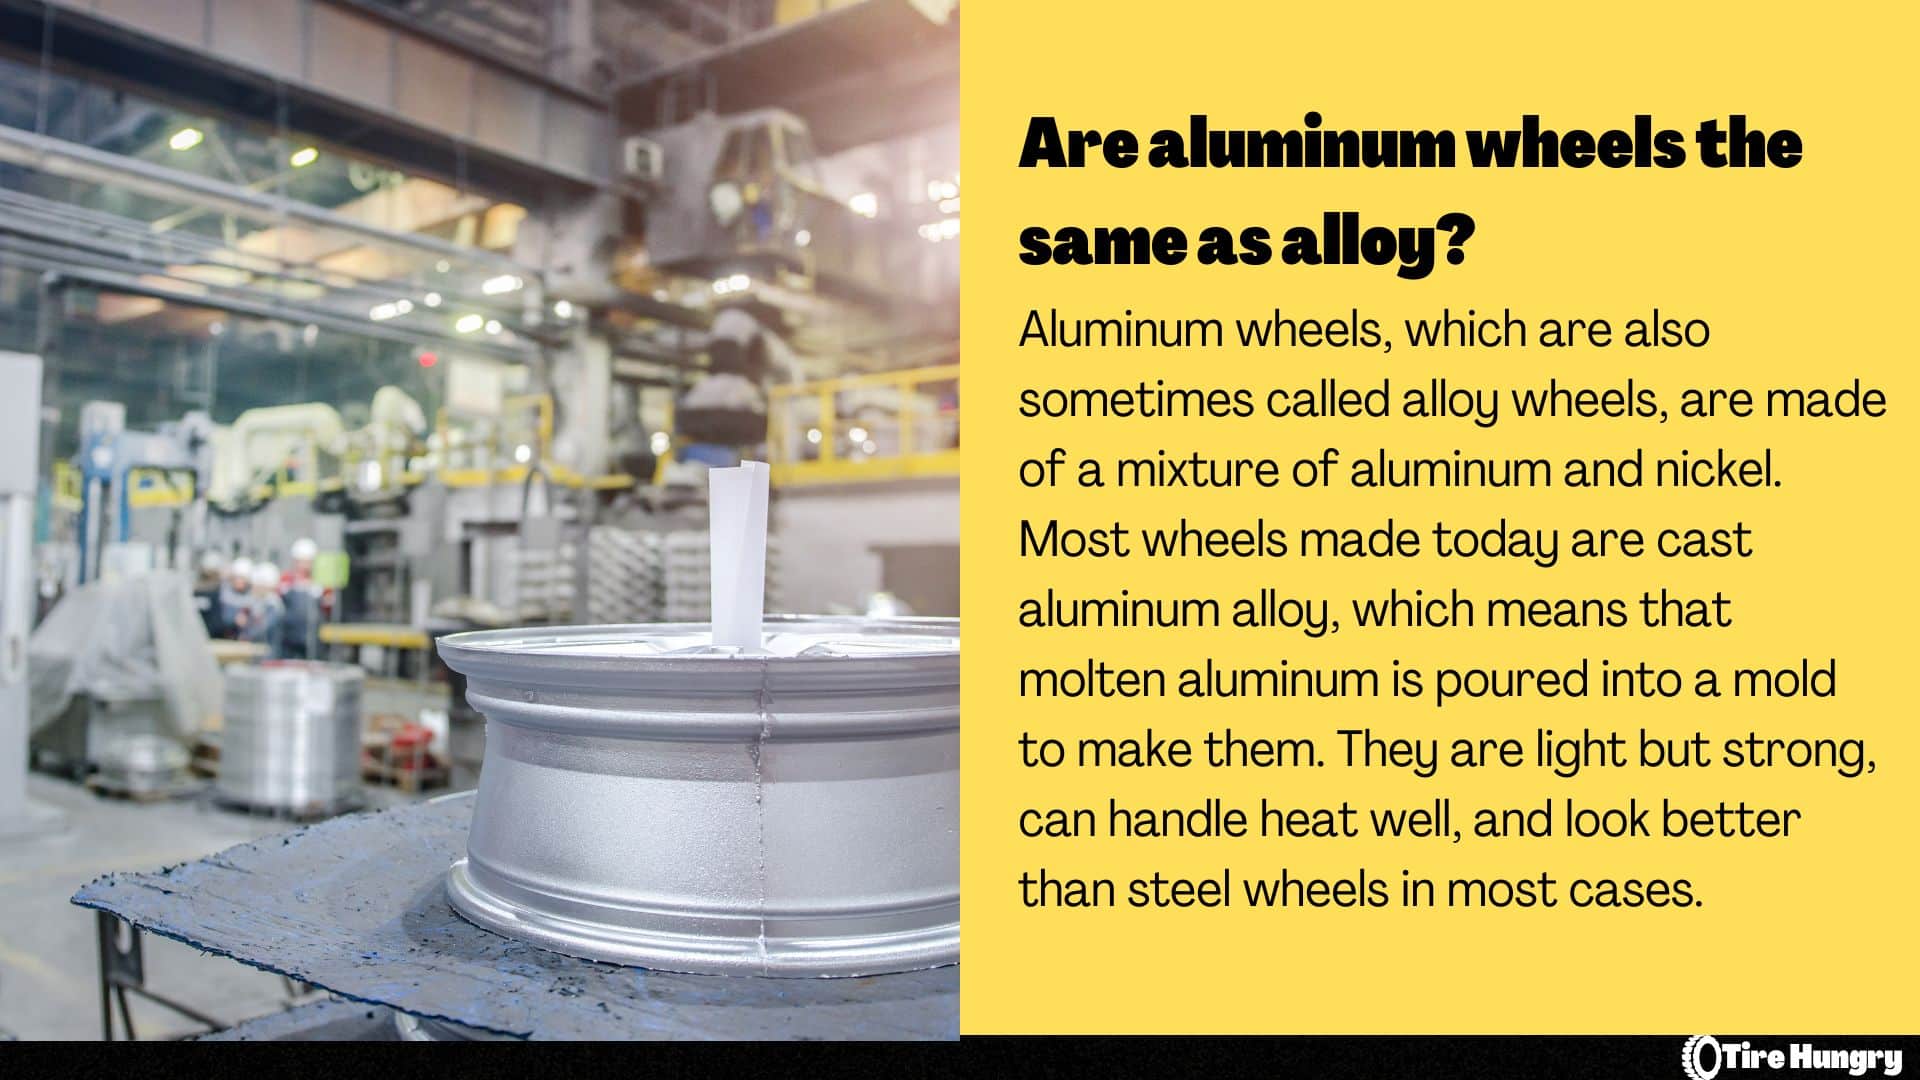 Are aluminum wheels the same as alloy